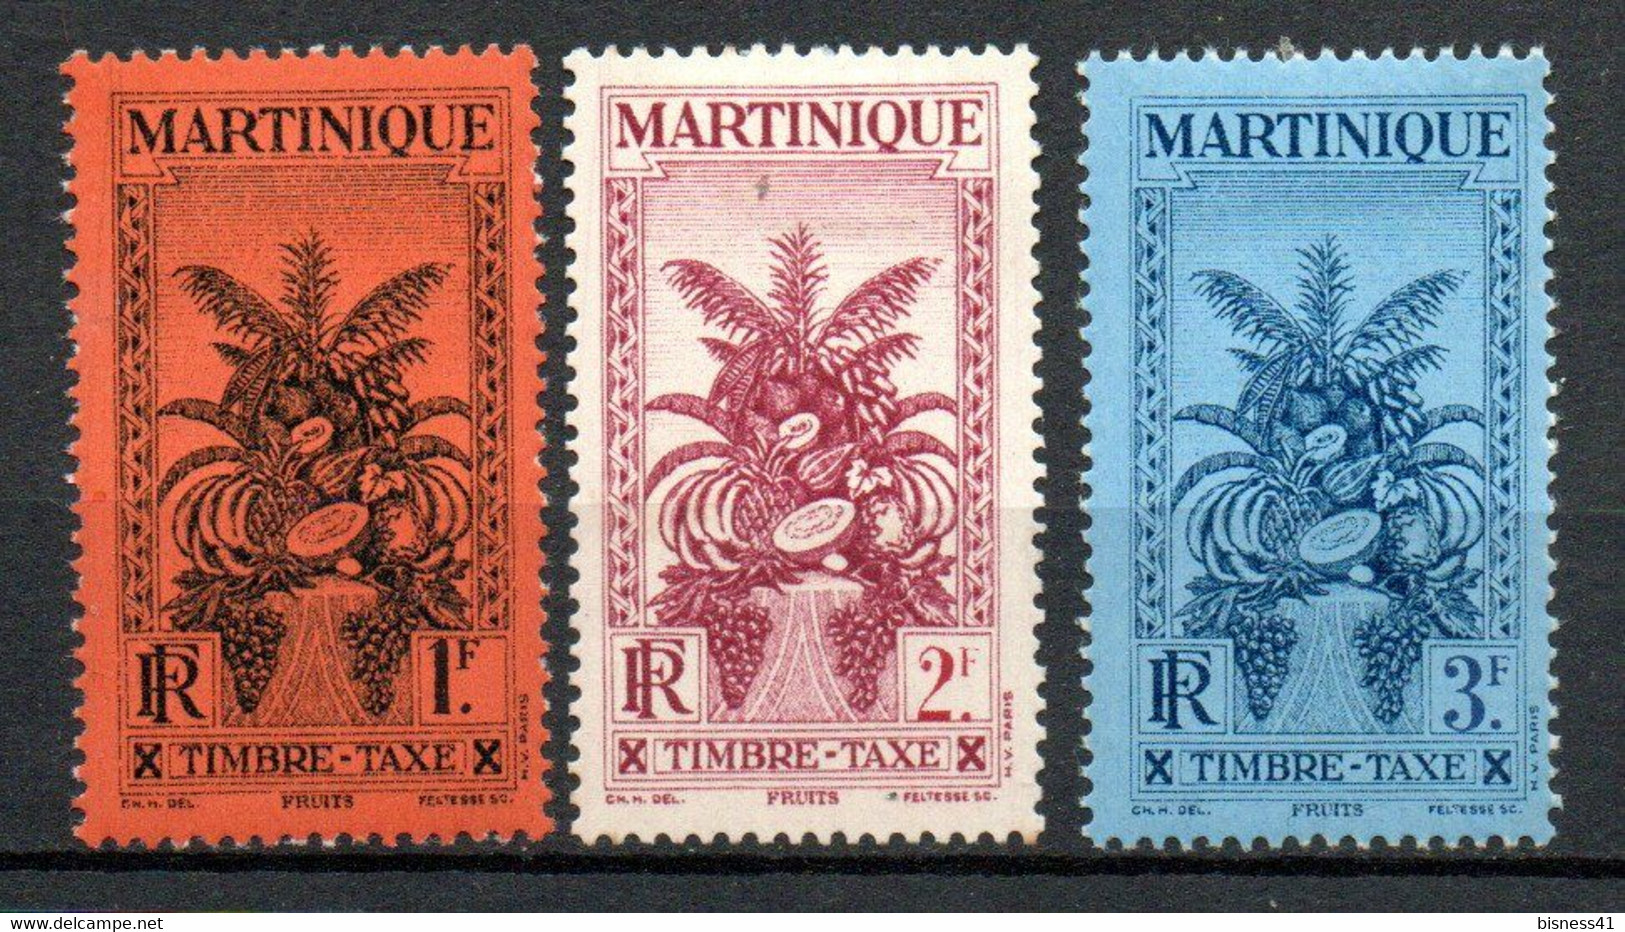 Col32 Colonie Martinique Taxe N° 20 à 22 Neuf X MH Cote : 10,50€ - Postage Due